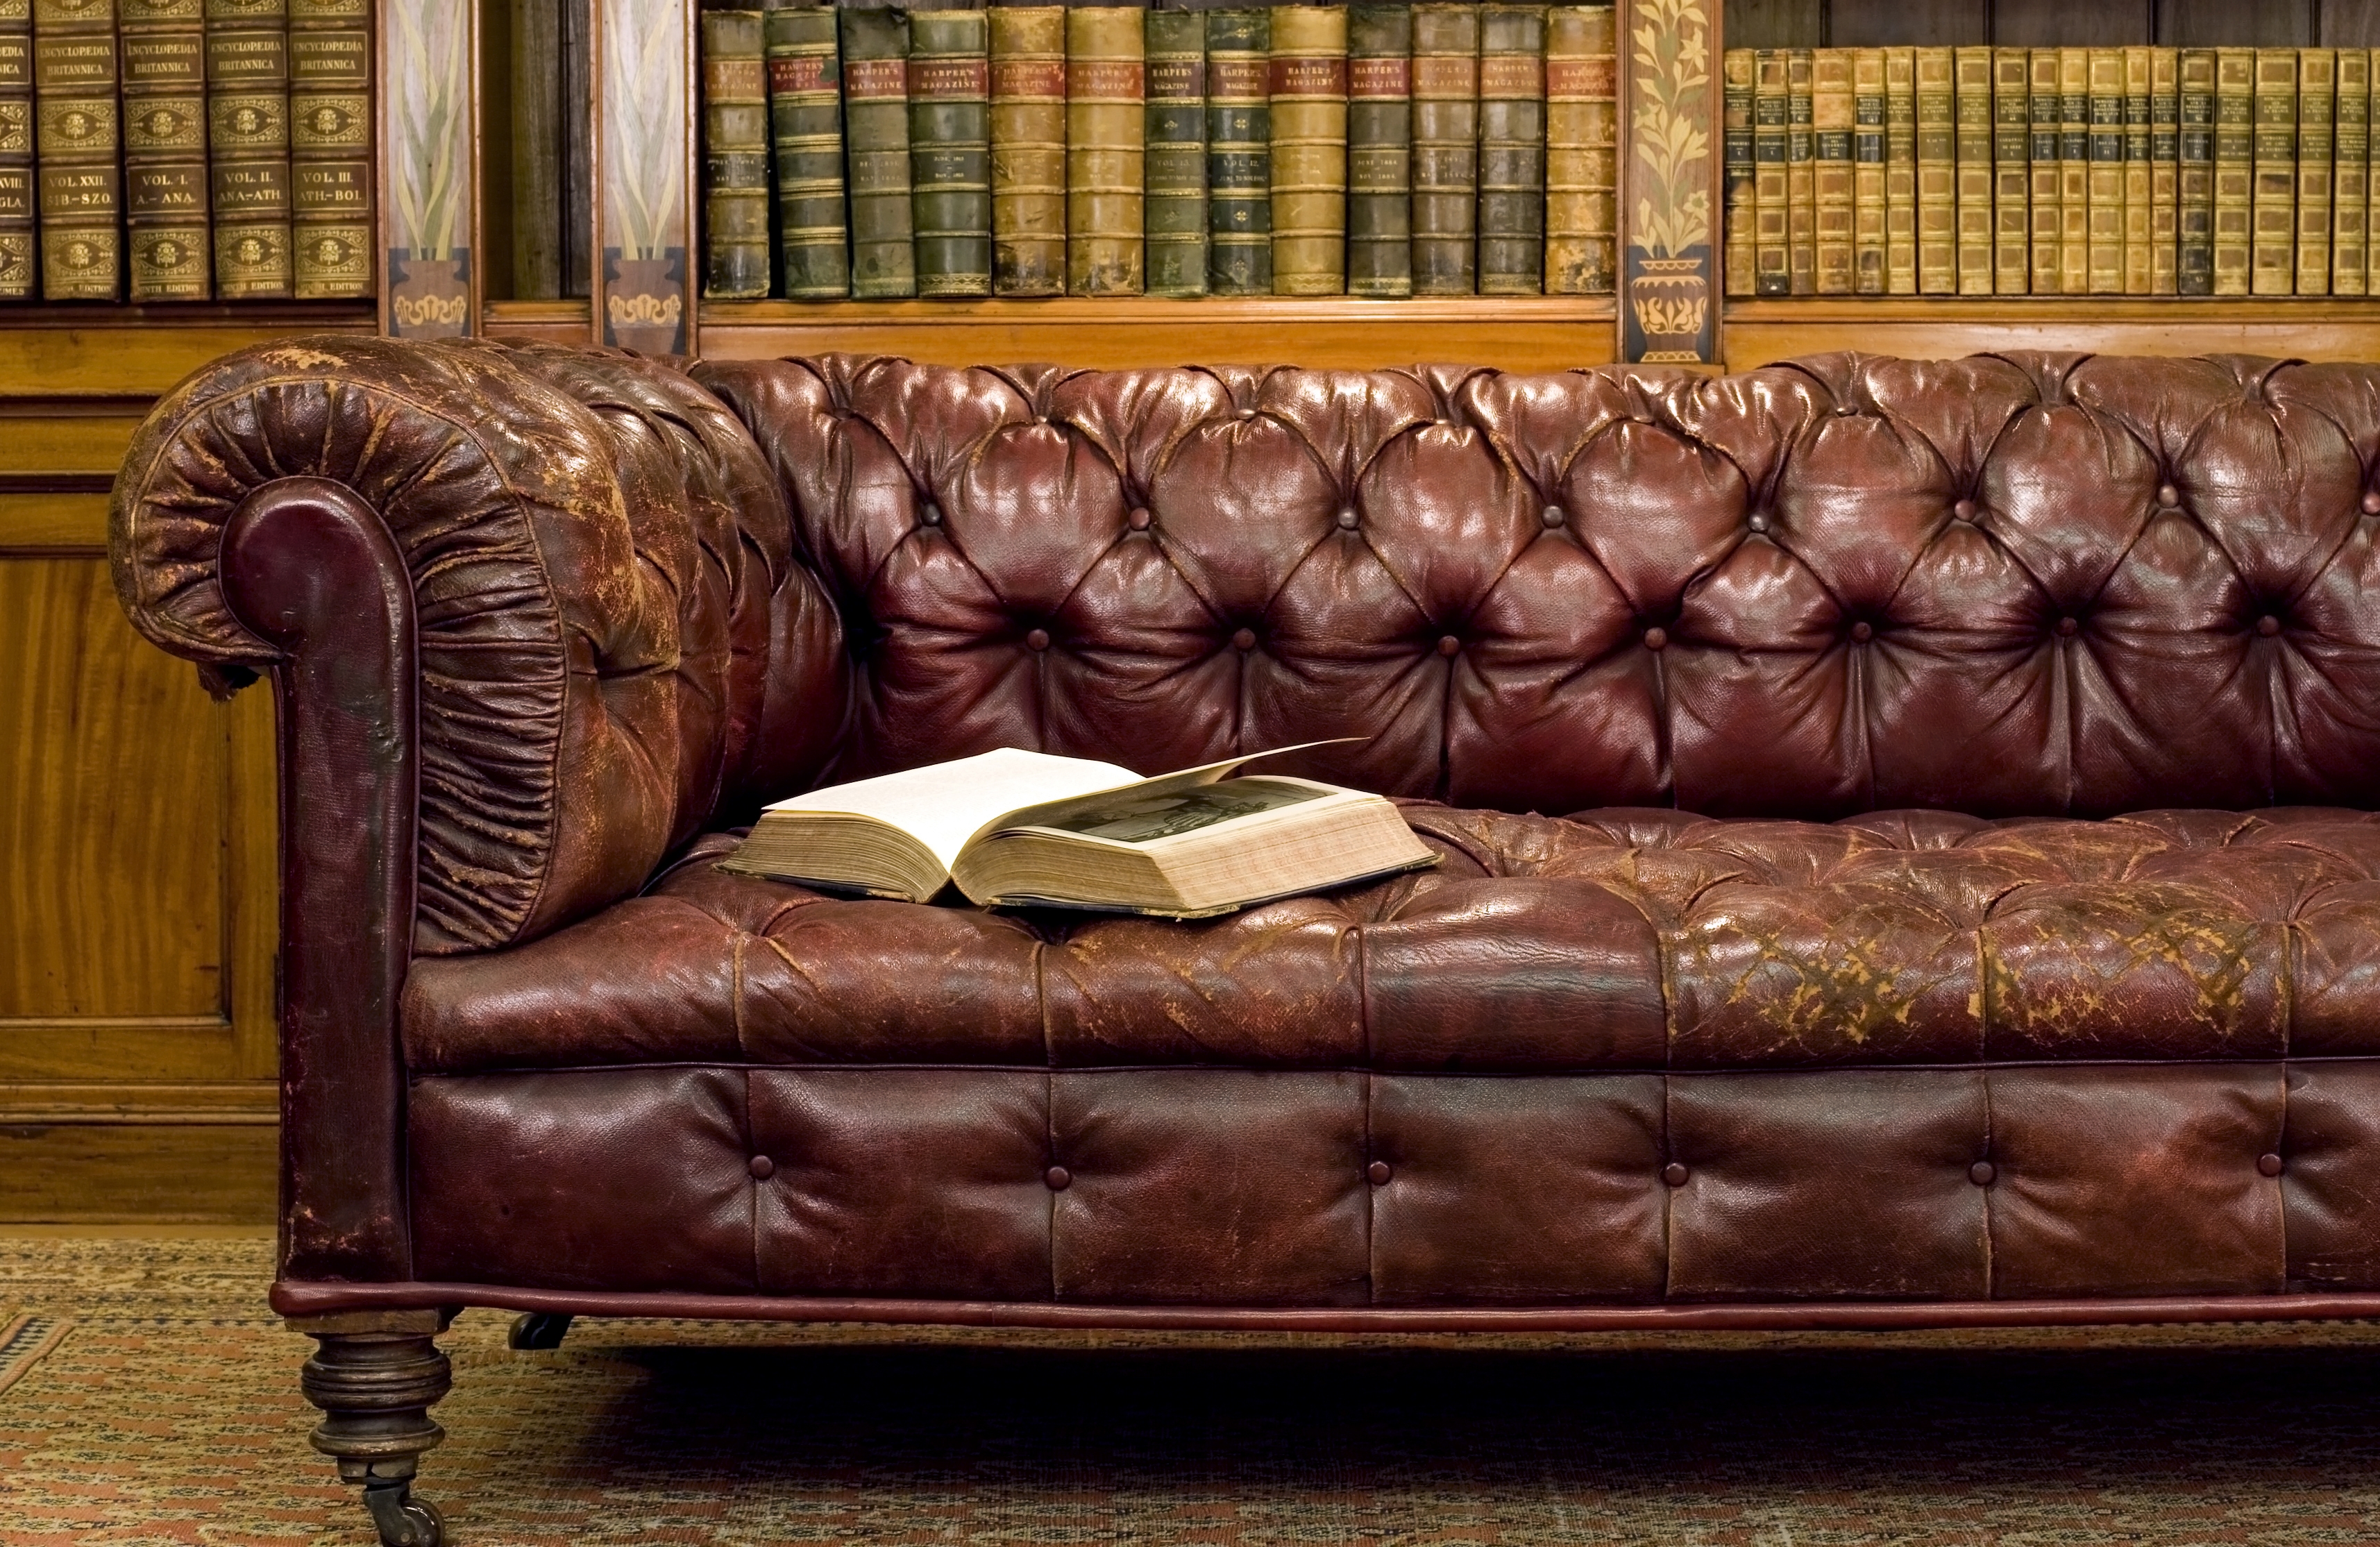 books, miscellanea, miscellaneous, style, book, sofa, antique, library, old man, antiquity, antiques